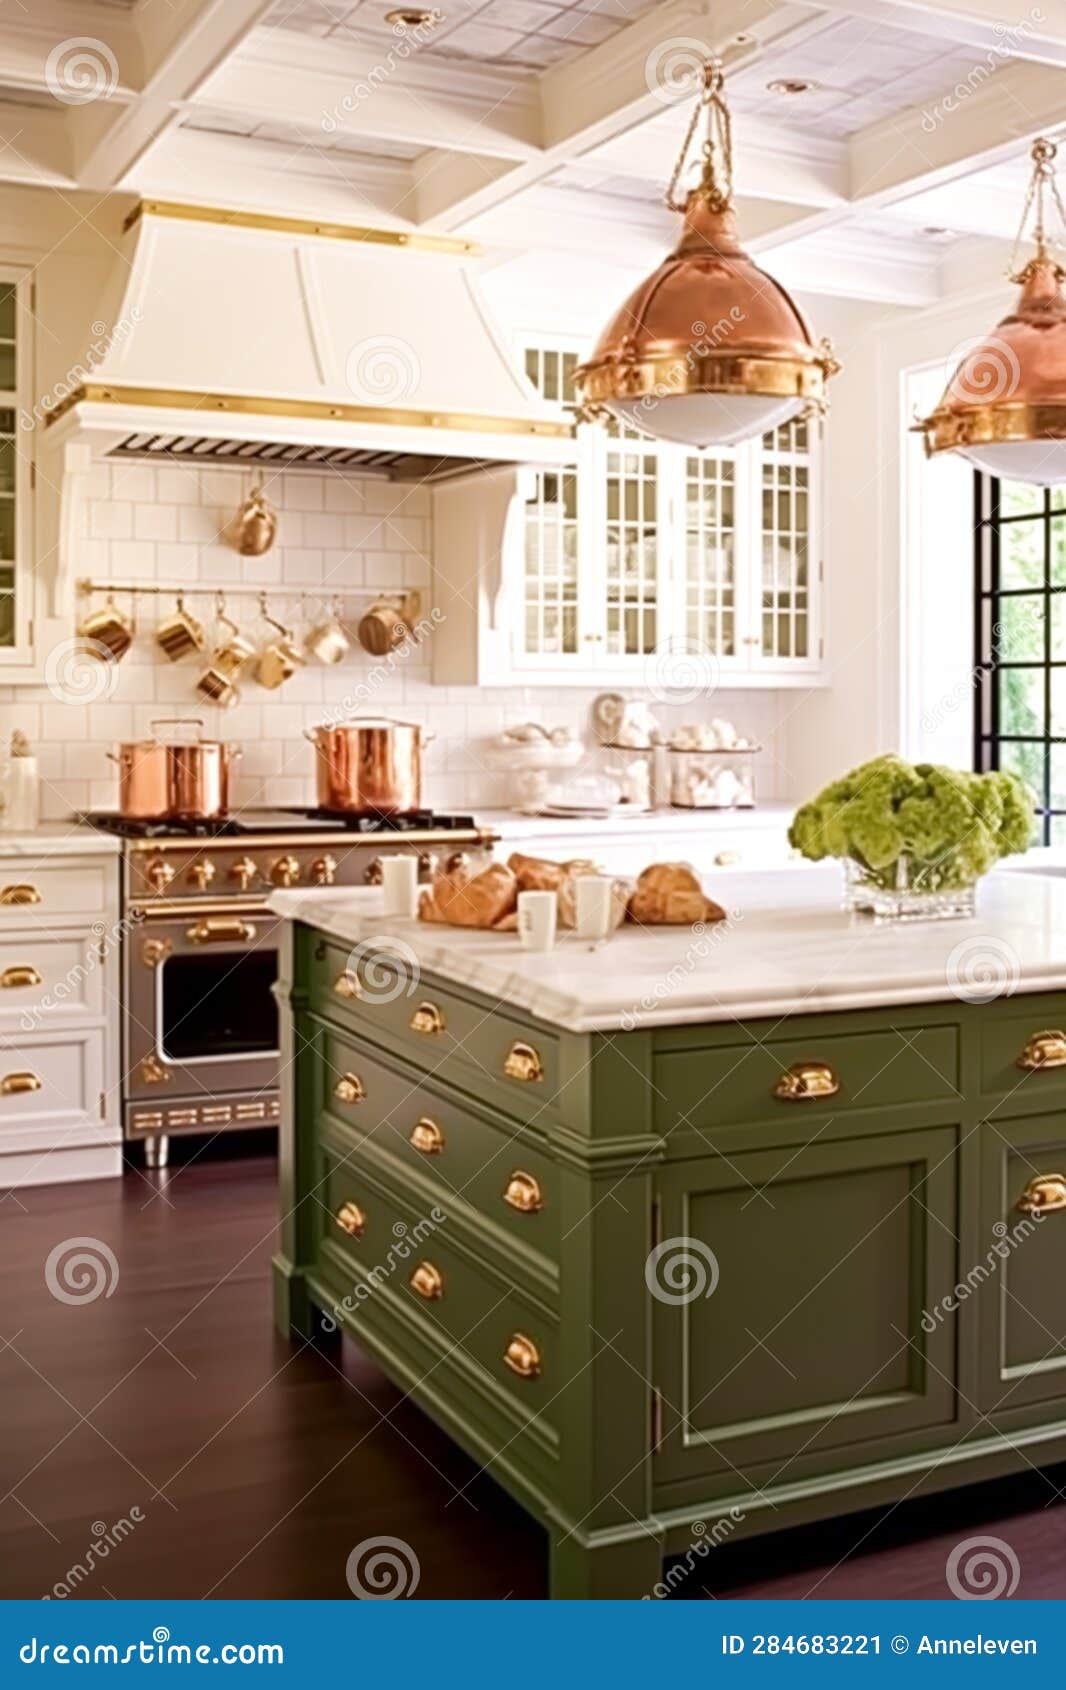 https://thumbs.dreamstime.com/z/kitchen-decor-interior-design-house-improvement-bespoke-sage-green-english-frame-cabinets-countertop-appliance-country-284683221.jpg